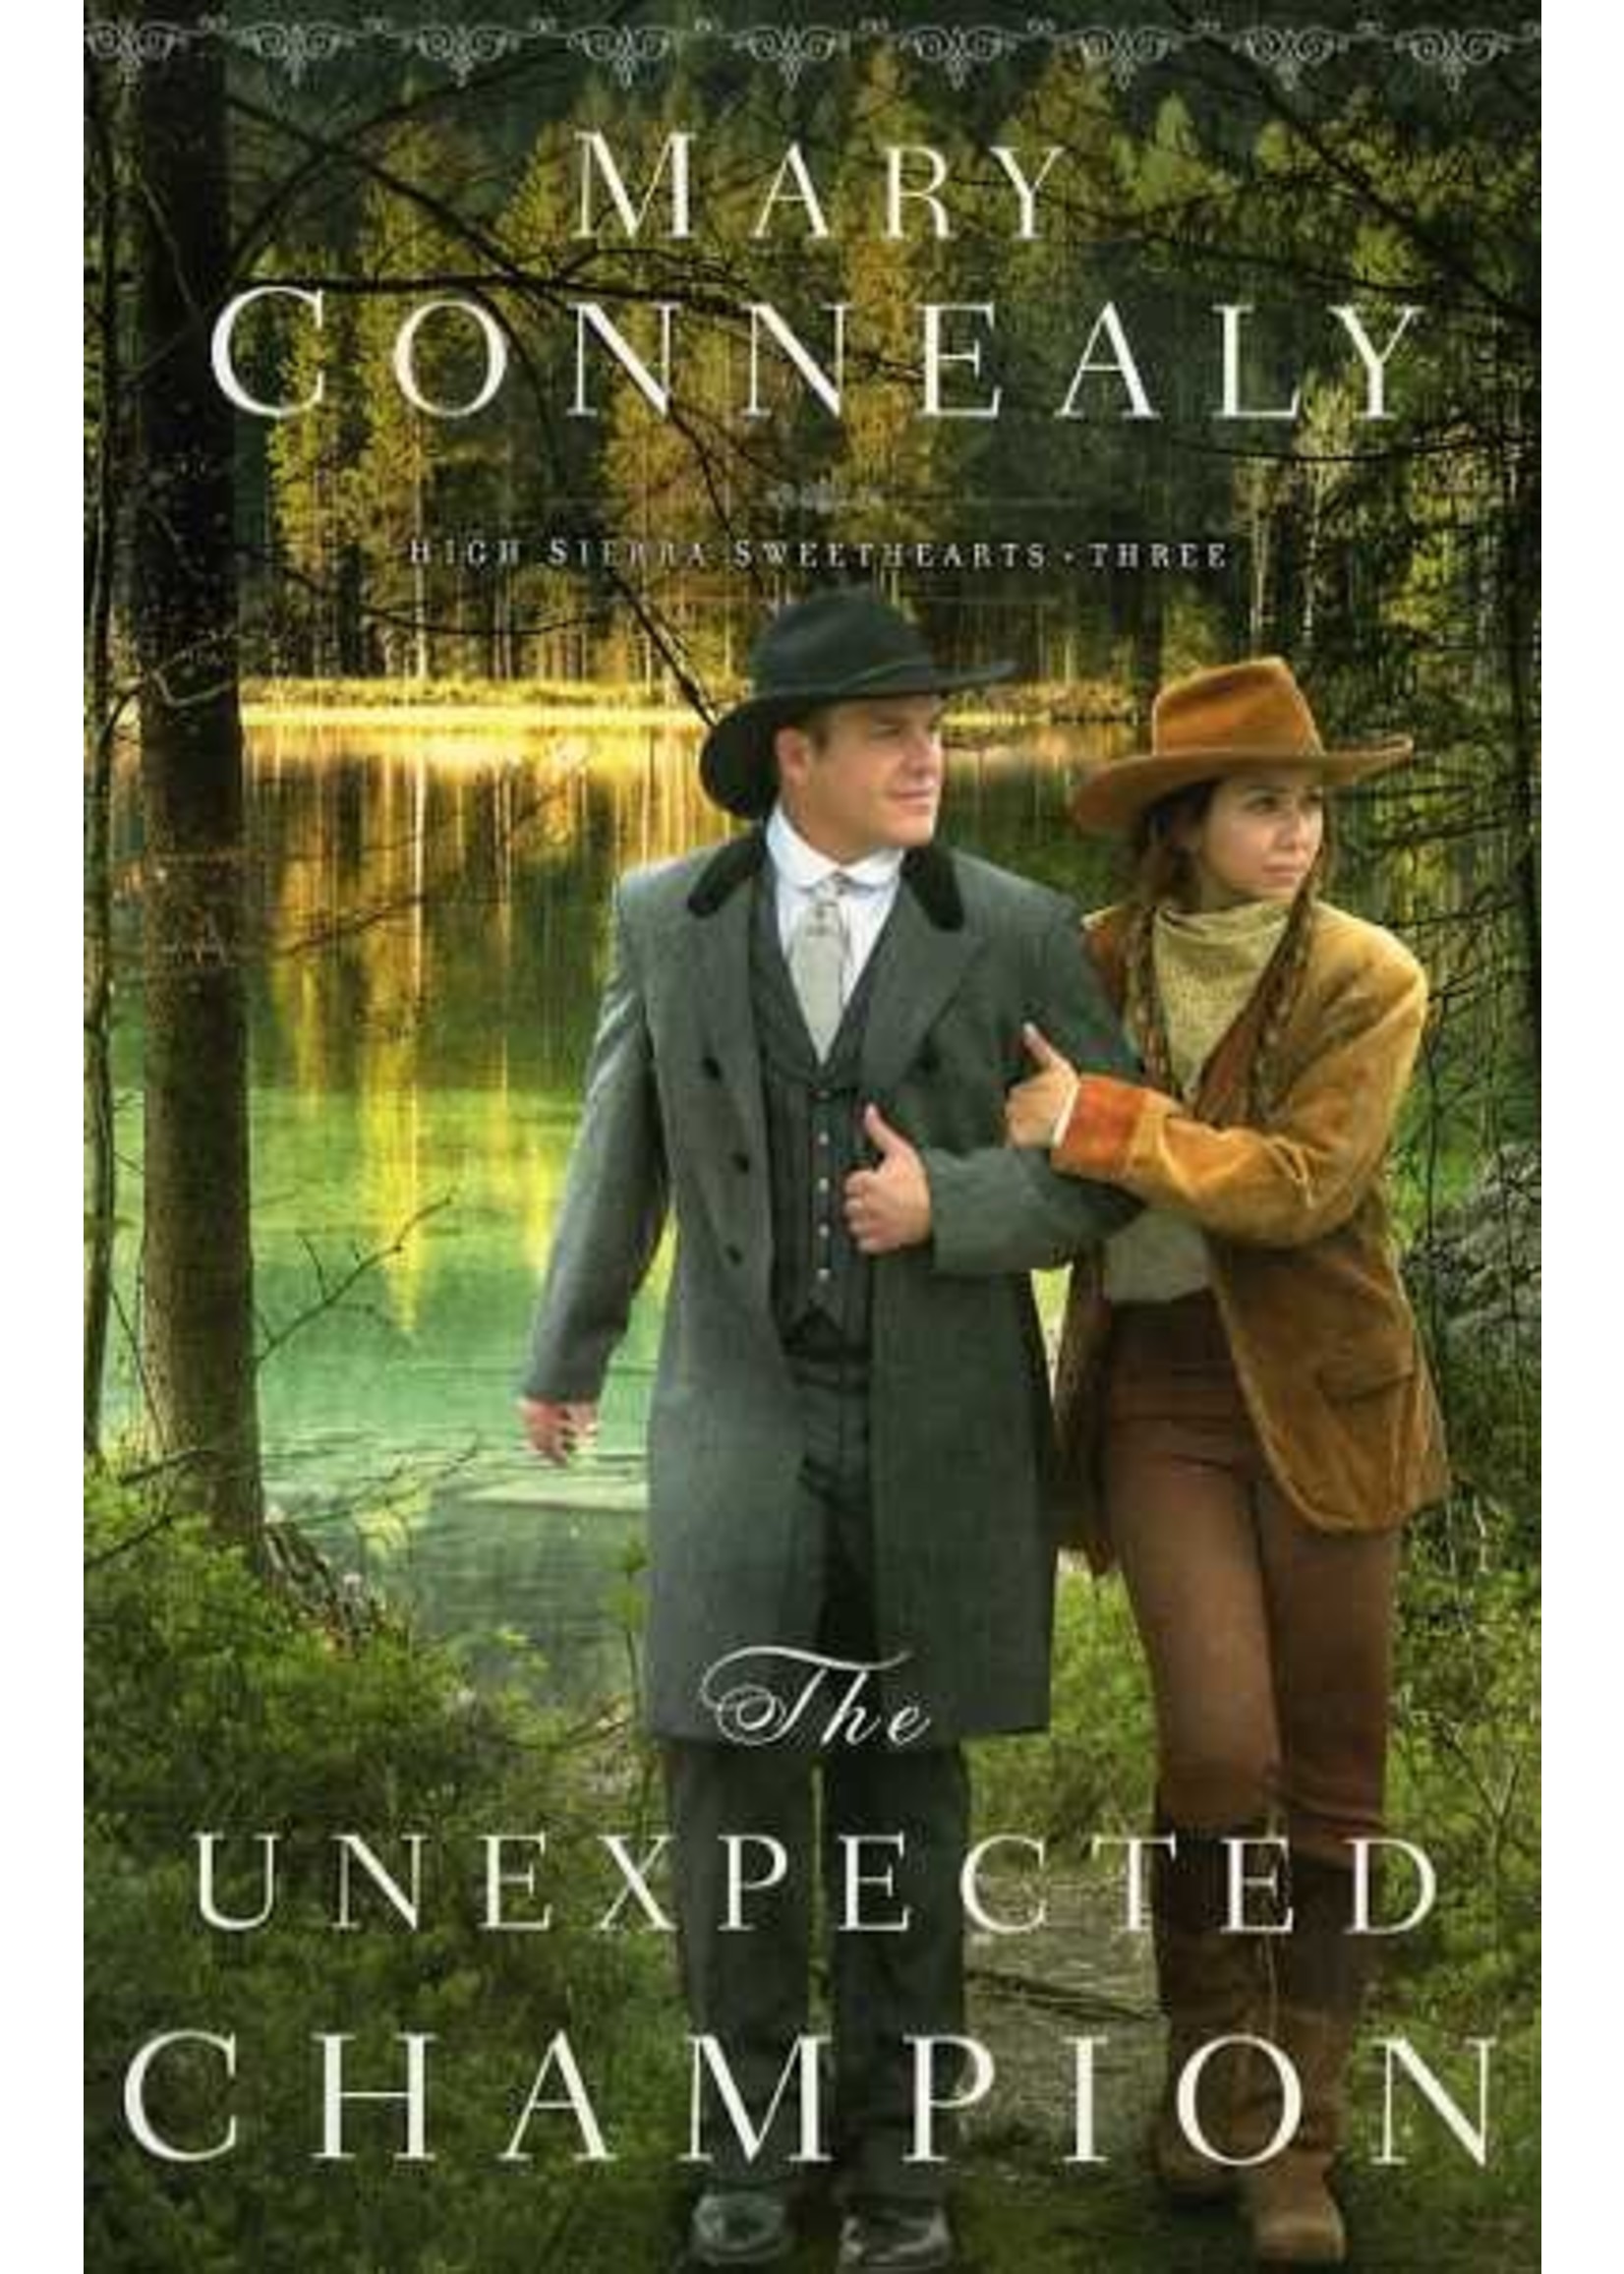 Bethany House The Unexpected Champion (High Sierra Sweethearts 3) - Mary Connealy